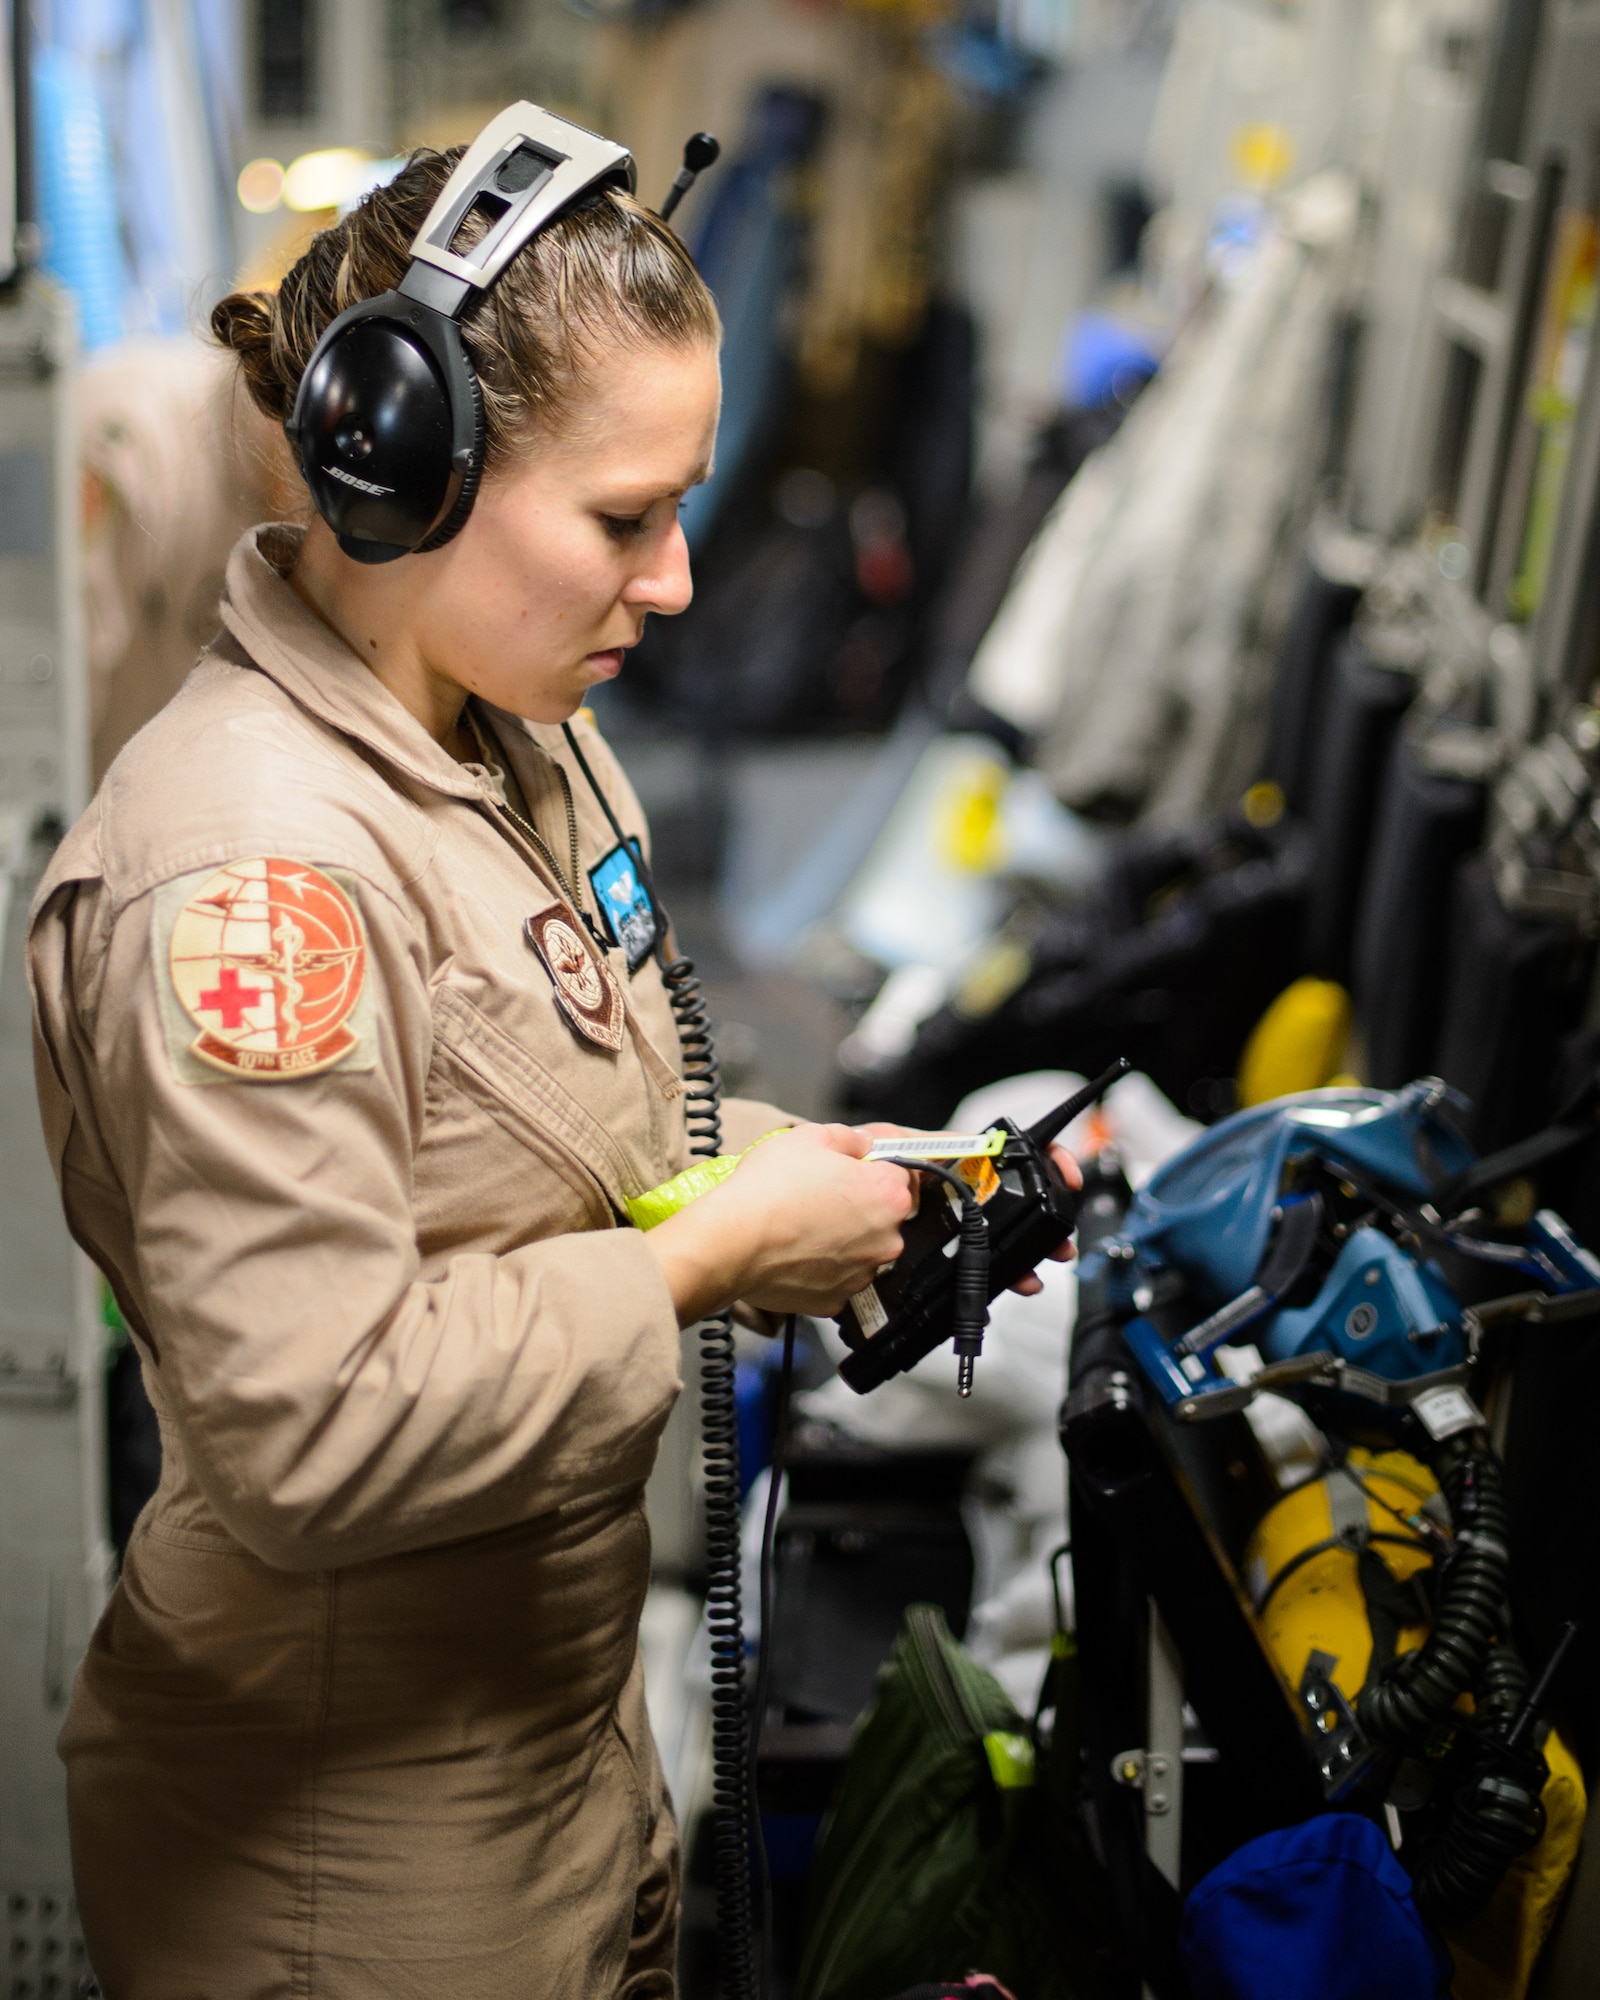 Senior Airman Beverly Spencer, 10th Expeditionary Aeromedical Evacuation Flight technician, checks a radio’s service Nov. 10, 2015, at Ramstein Air Base, Germany. After configuring the inside of the C-17 Globemaster III into a flying ambulance, the Airmen test their equipment to ensure they can provide the best possible treatment while flying thousands of feet in the air. The 10th EAEF is a mixture of active-duty, reserve and guard Airmen deployed to Ramstein, constantly flying to war zones to retrieve patients needing higher levels of medical care. (U.S. Air Force photo/Staff Sgt. Armando A. Schwier-Morales)